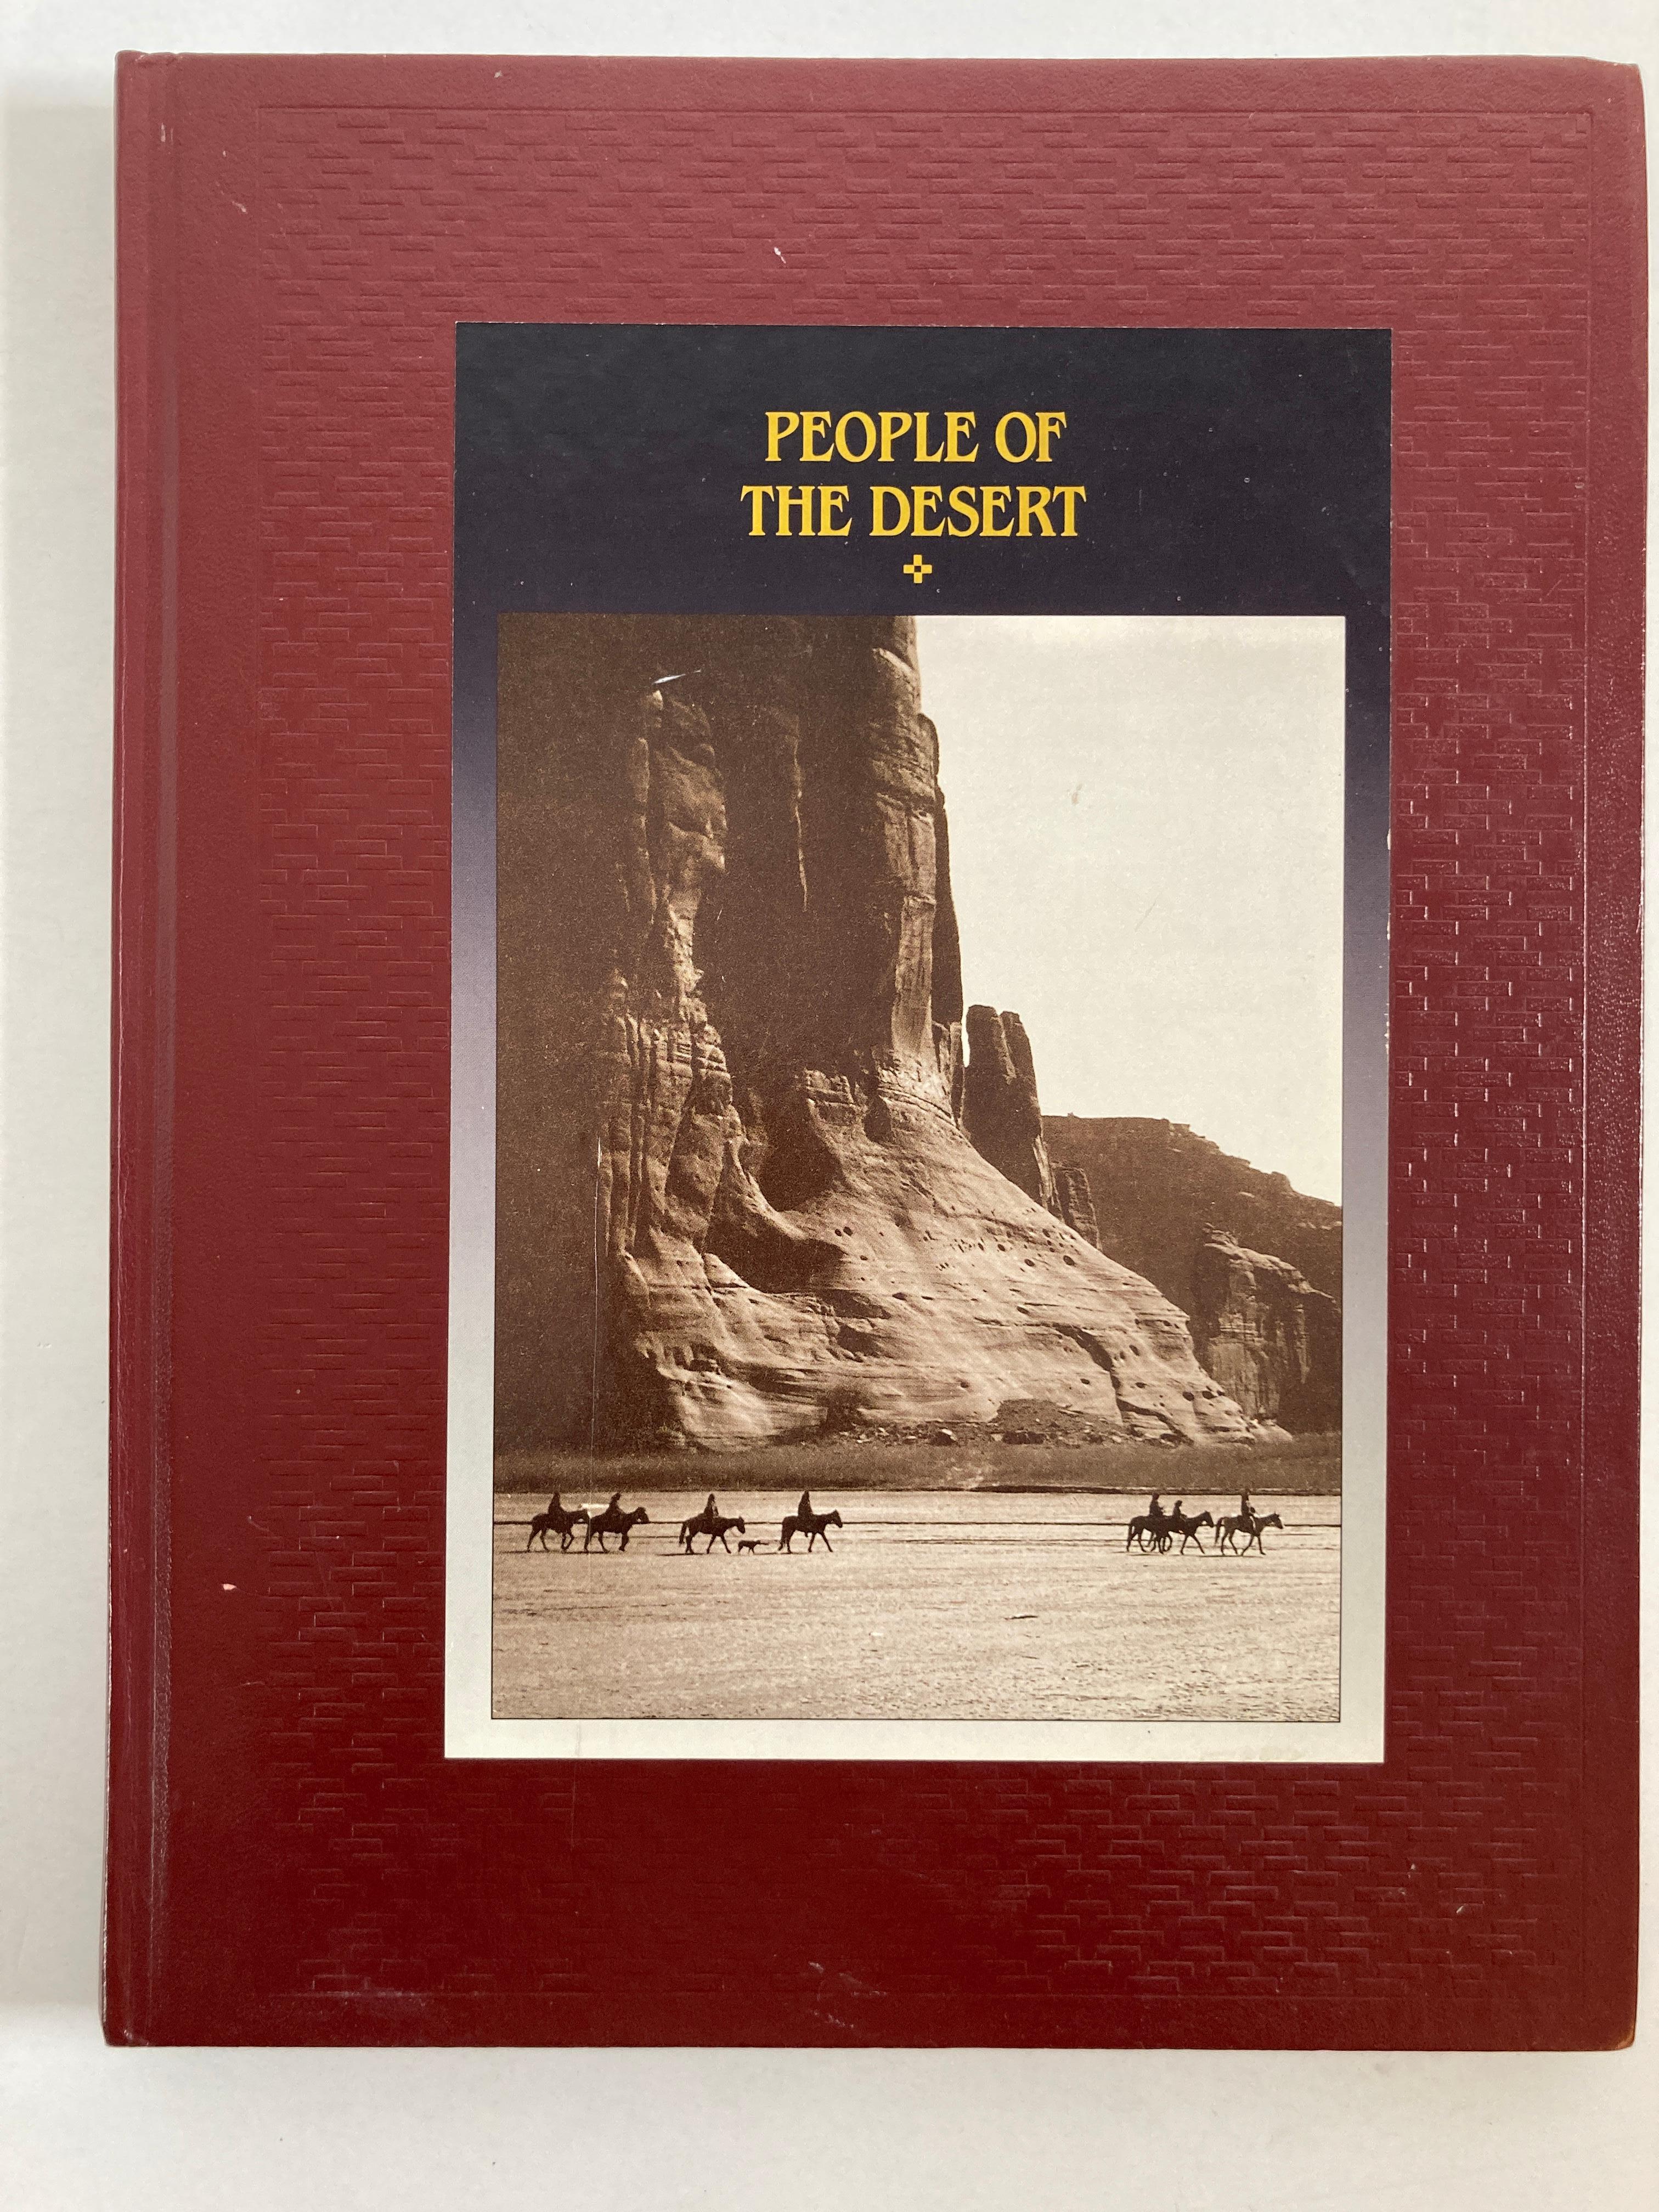 The American Indians, The Way of the Warriors and People of the Desert Books 9